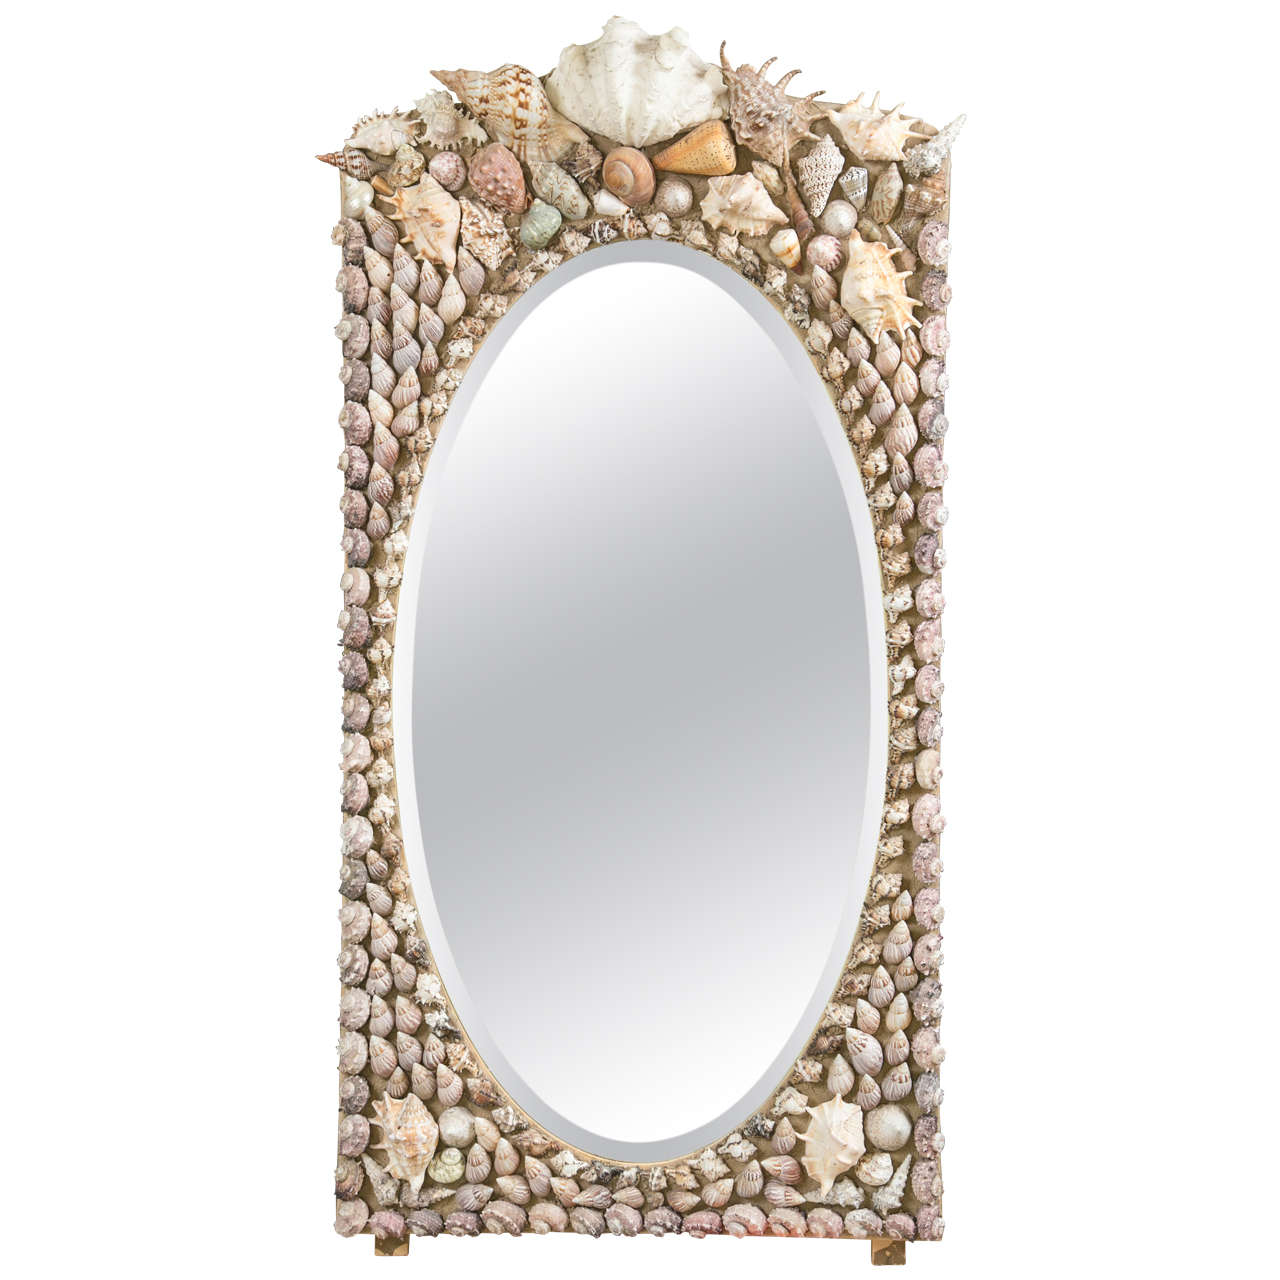 Large 1940s English Shell Encrusted Wall Mirror